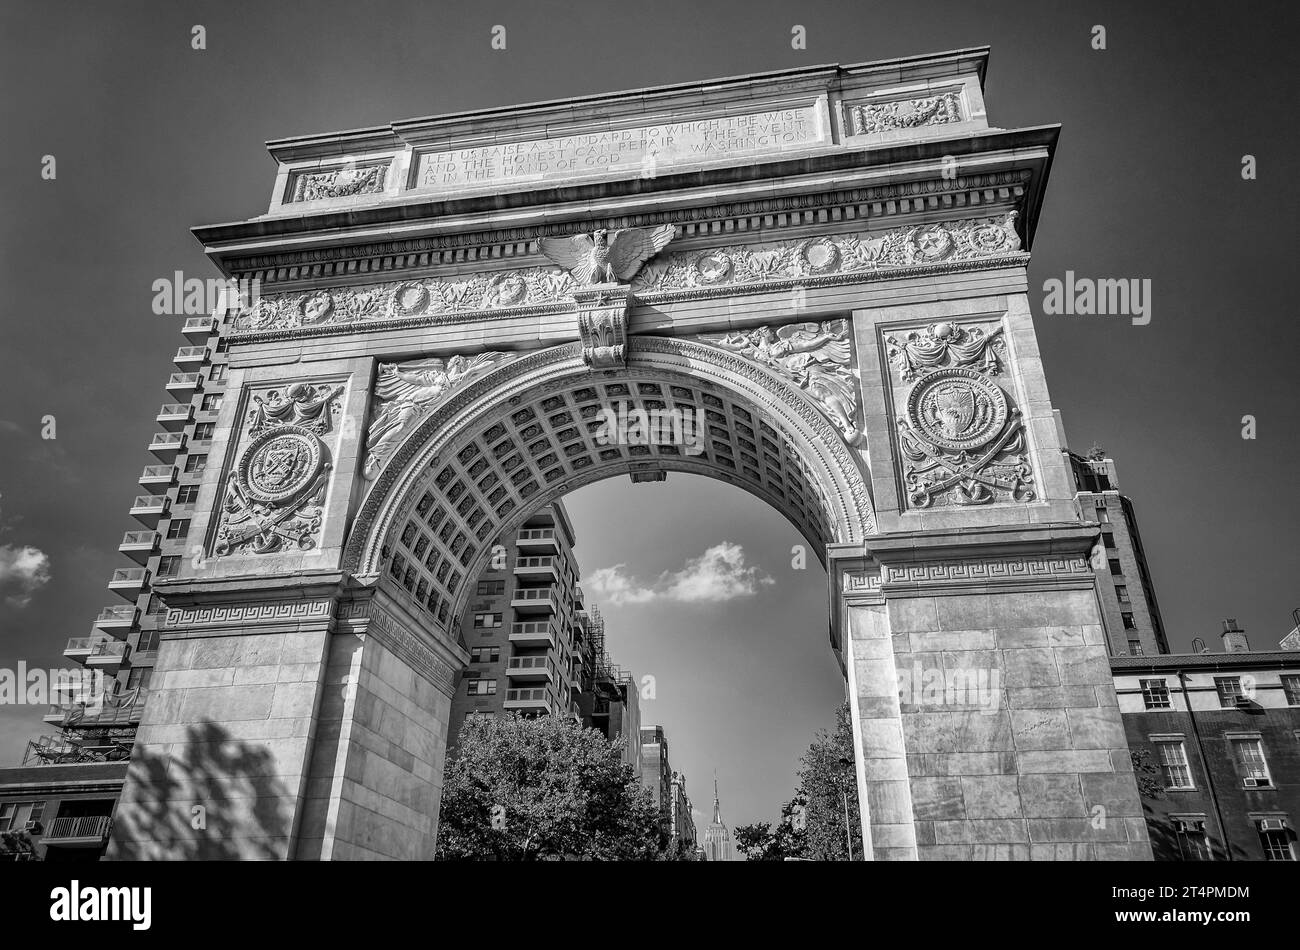 NEW YORK CITY - JUNE 1: Washington Square Arch on June 1, 2013 in New ...